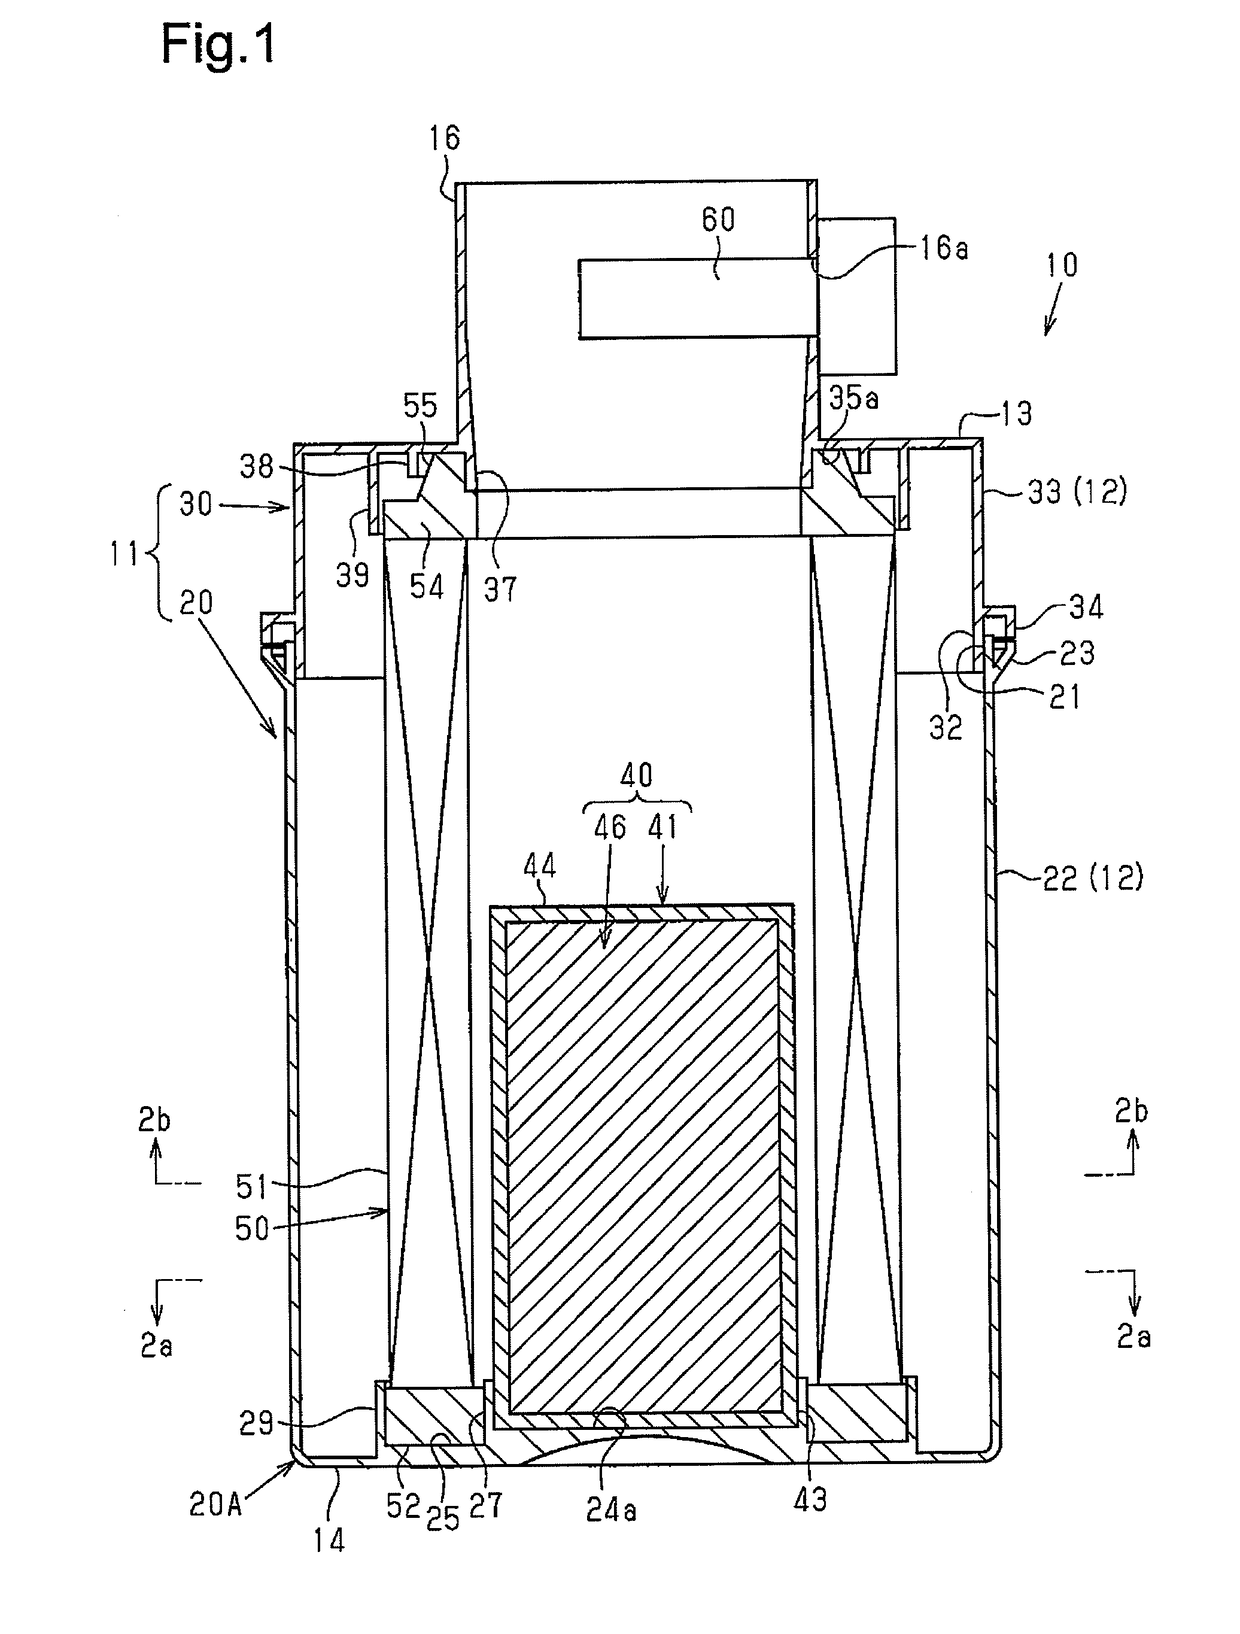 Cylindrical air cleaner for internal combustion engine